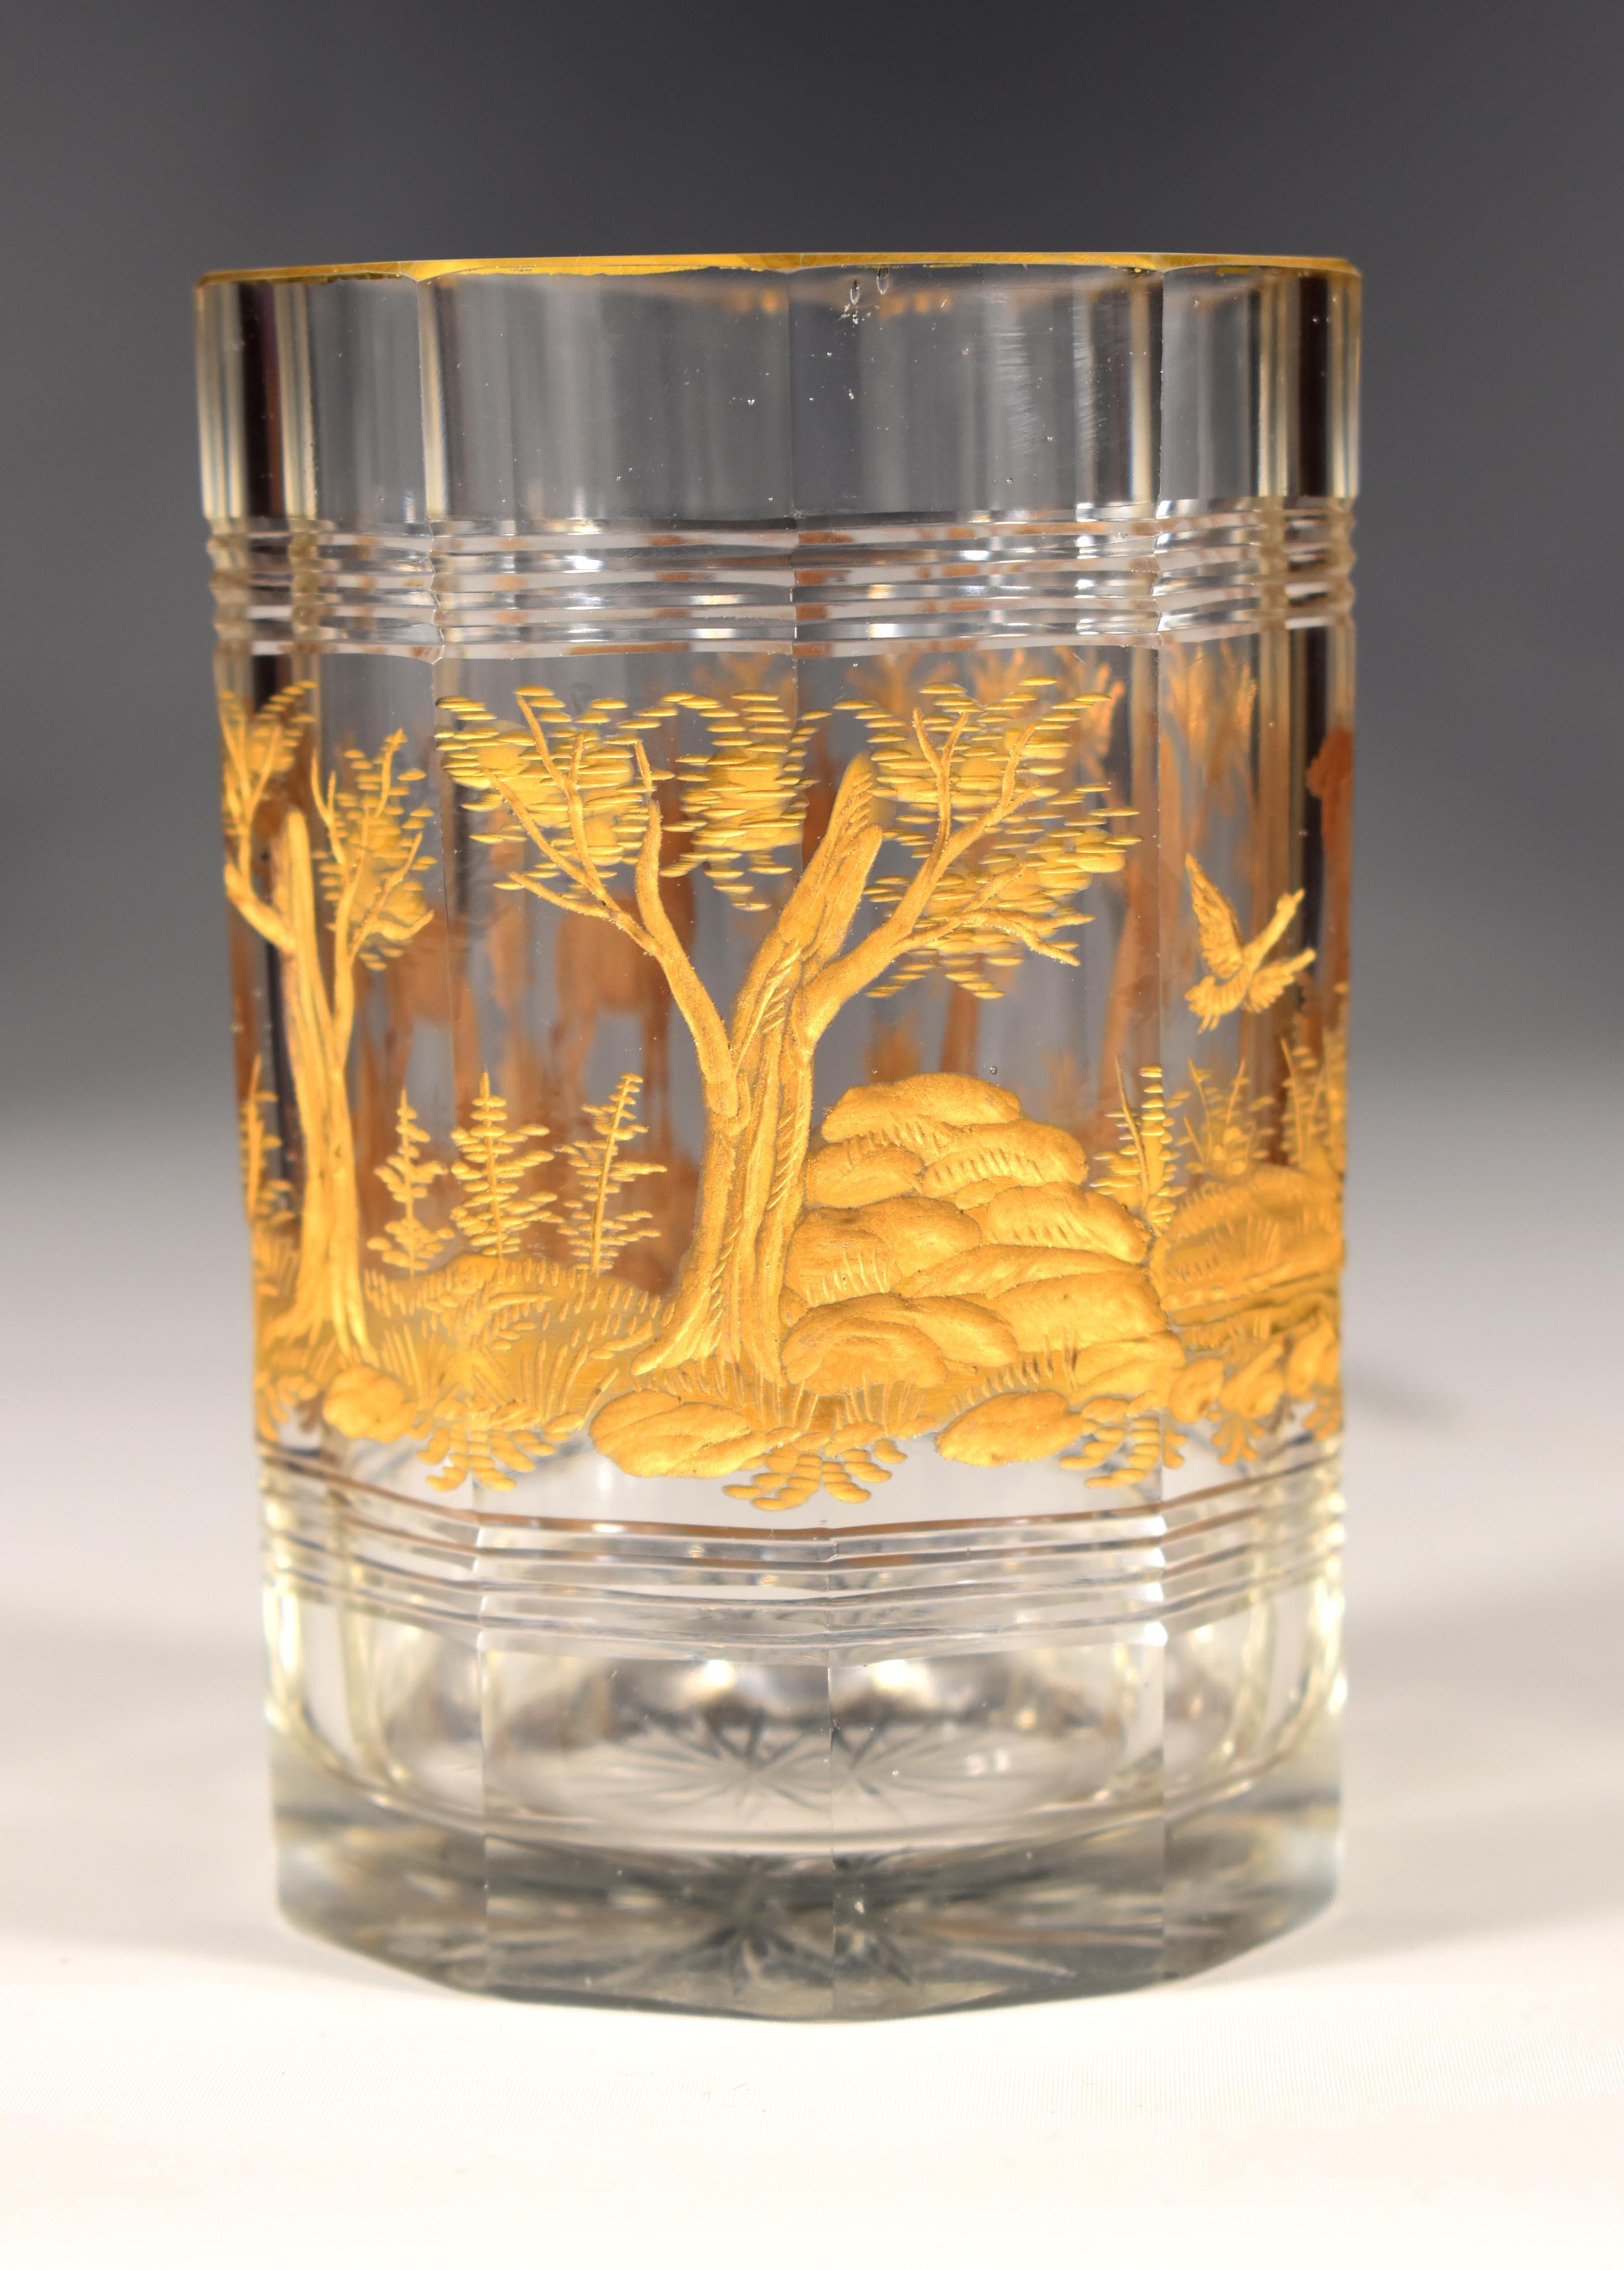 Gilded Vase + Two Gilded Glasses - Hunting motif. 20th century For Sale 4